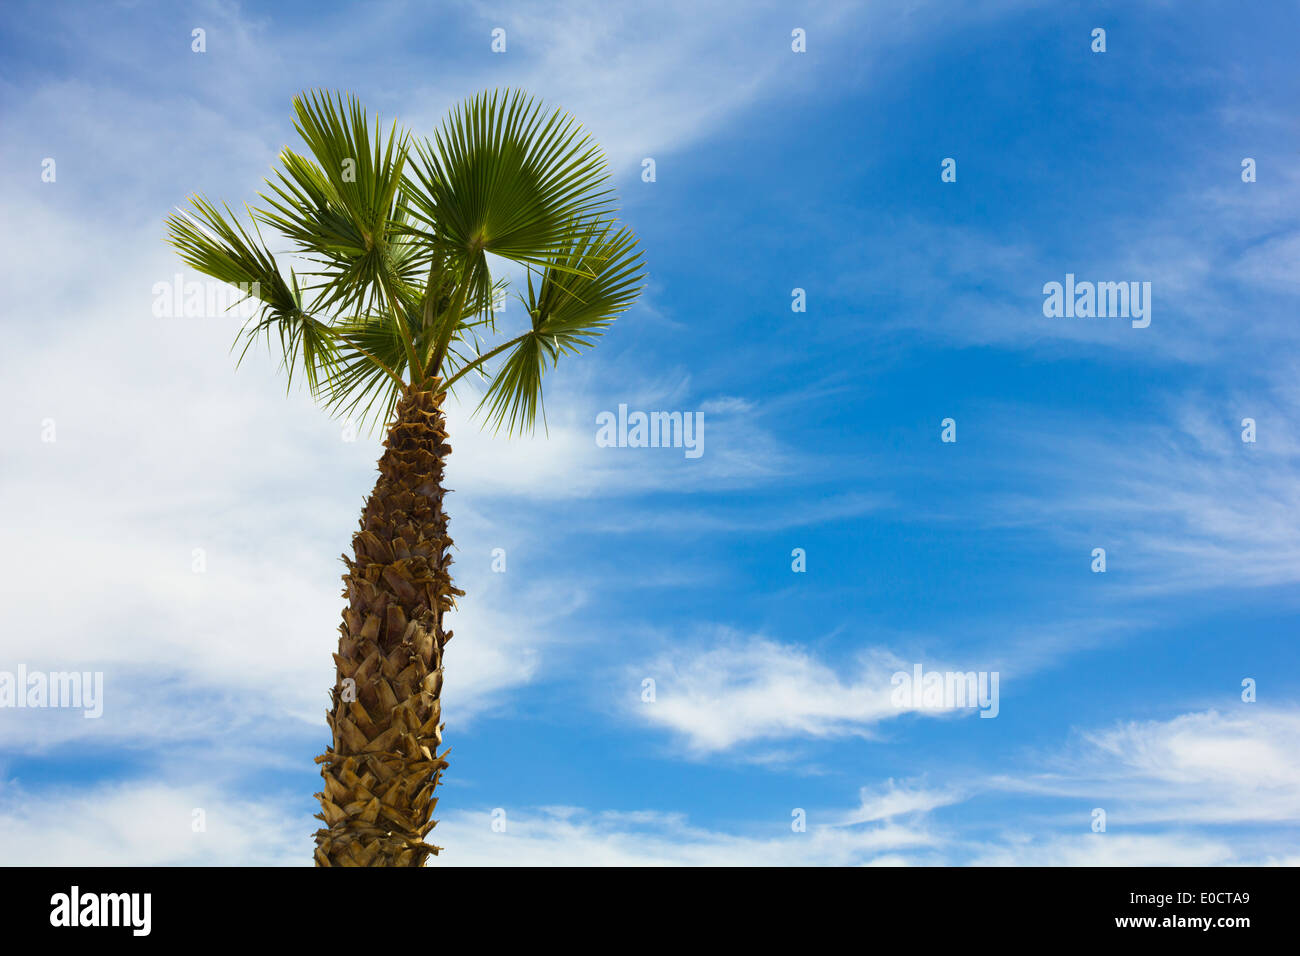 Green tree under blue sky and cloud background Stock Photo